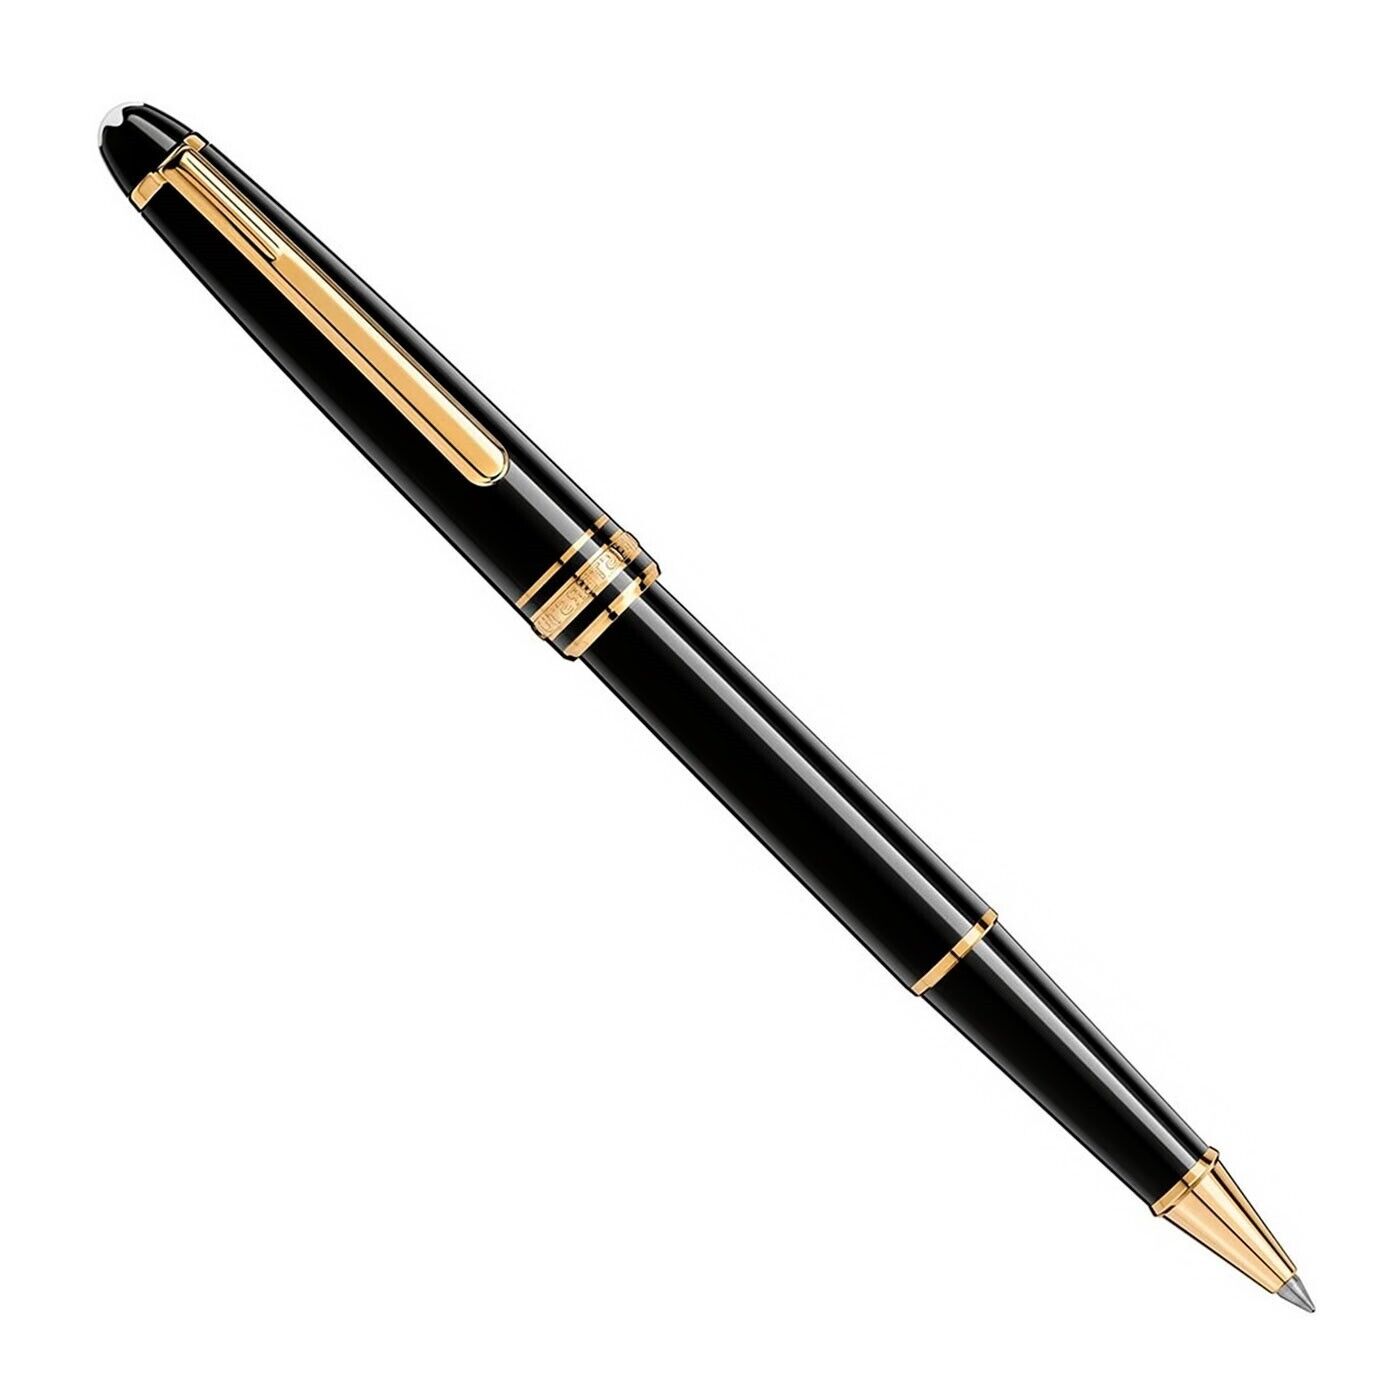 NEW MONTBLANC MEISTERSTÜCK  GOLD-COATED ROLLERBALL PEN Bestsellers